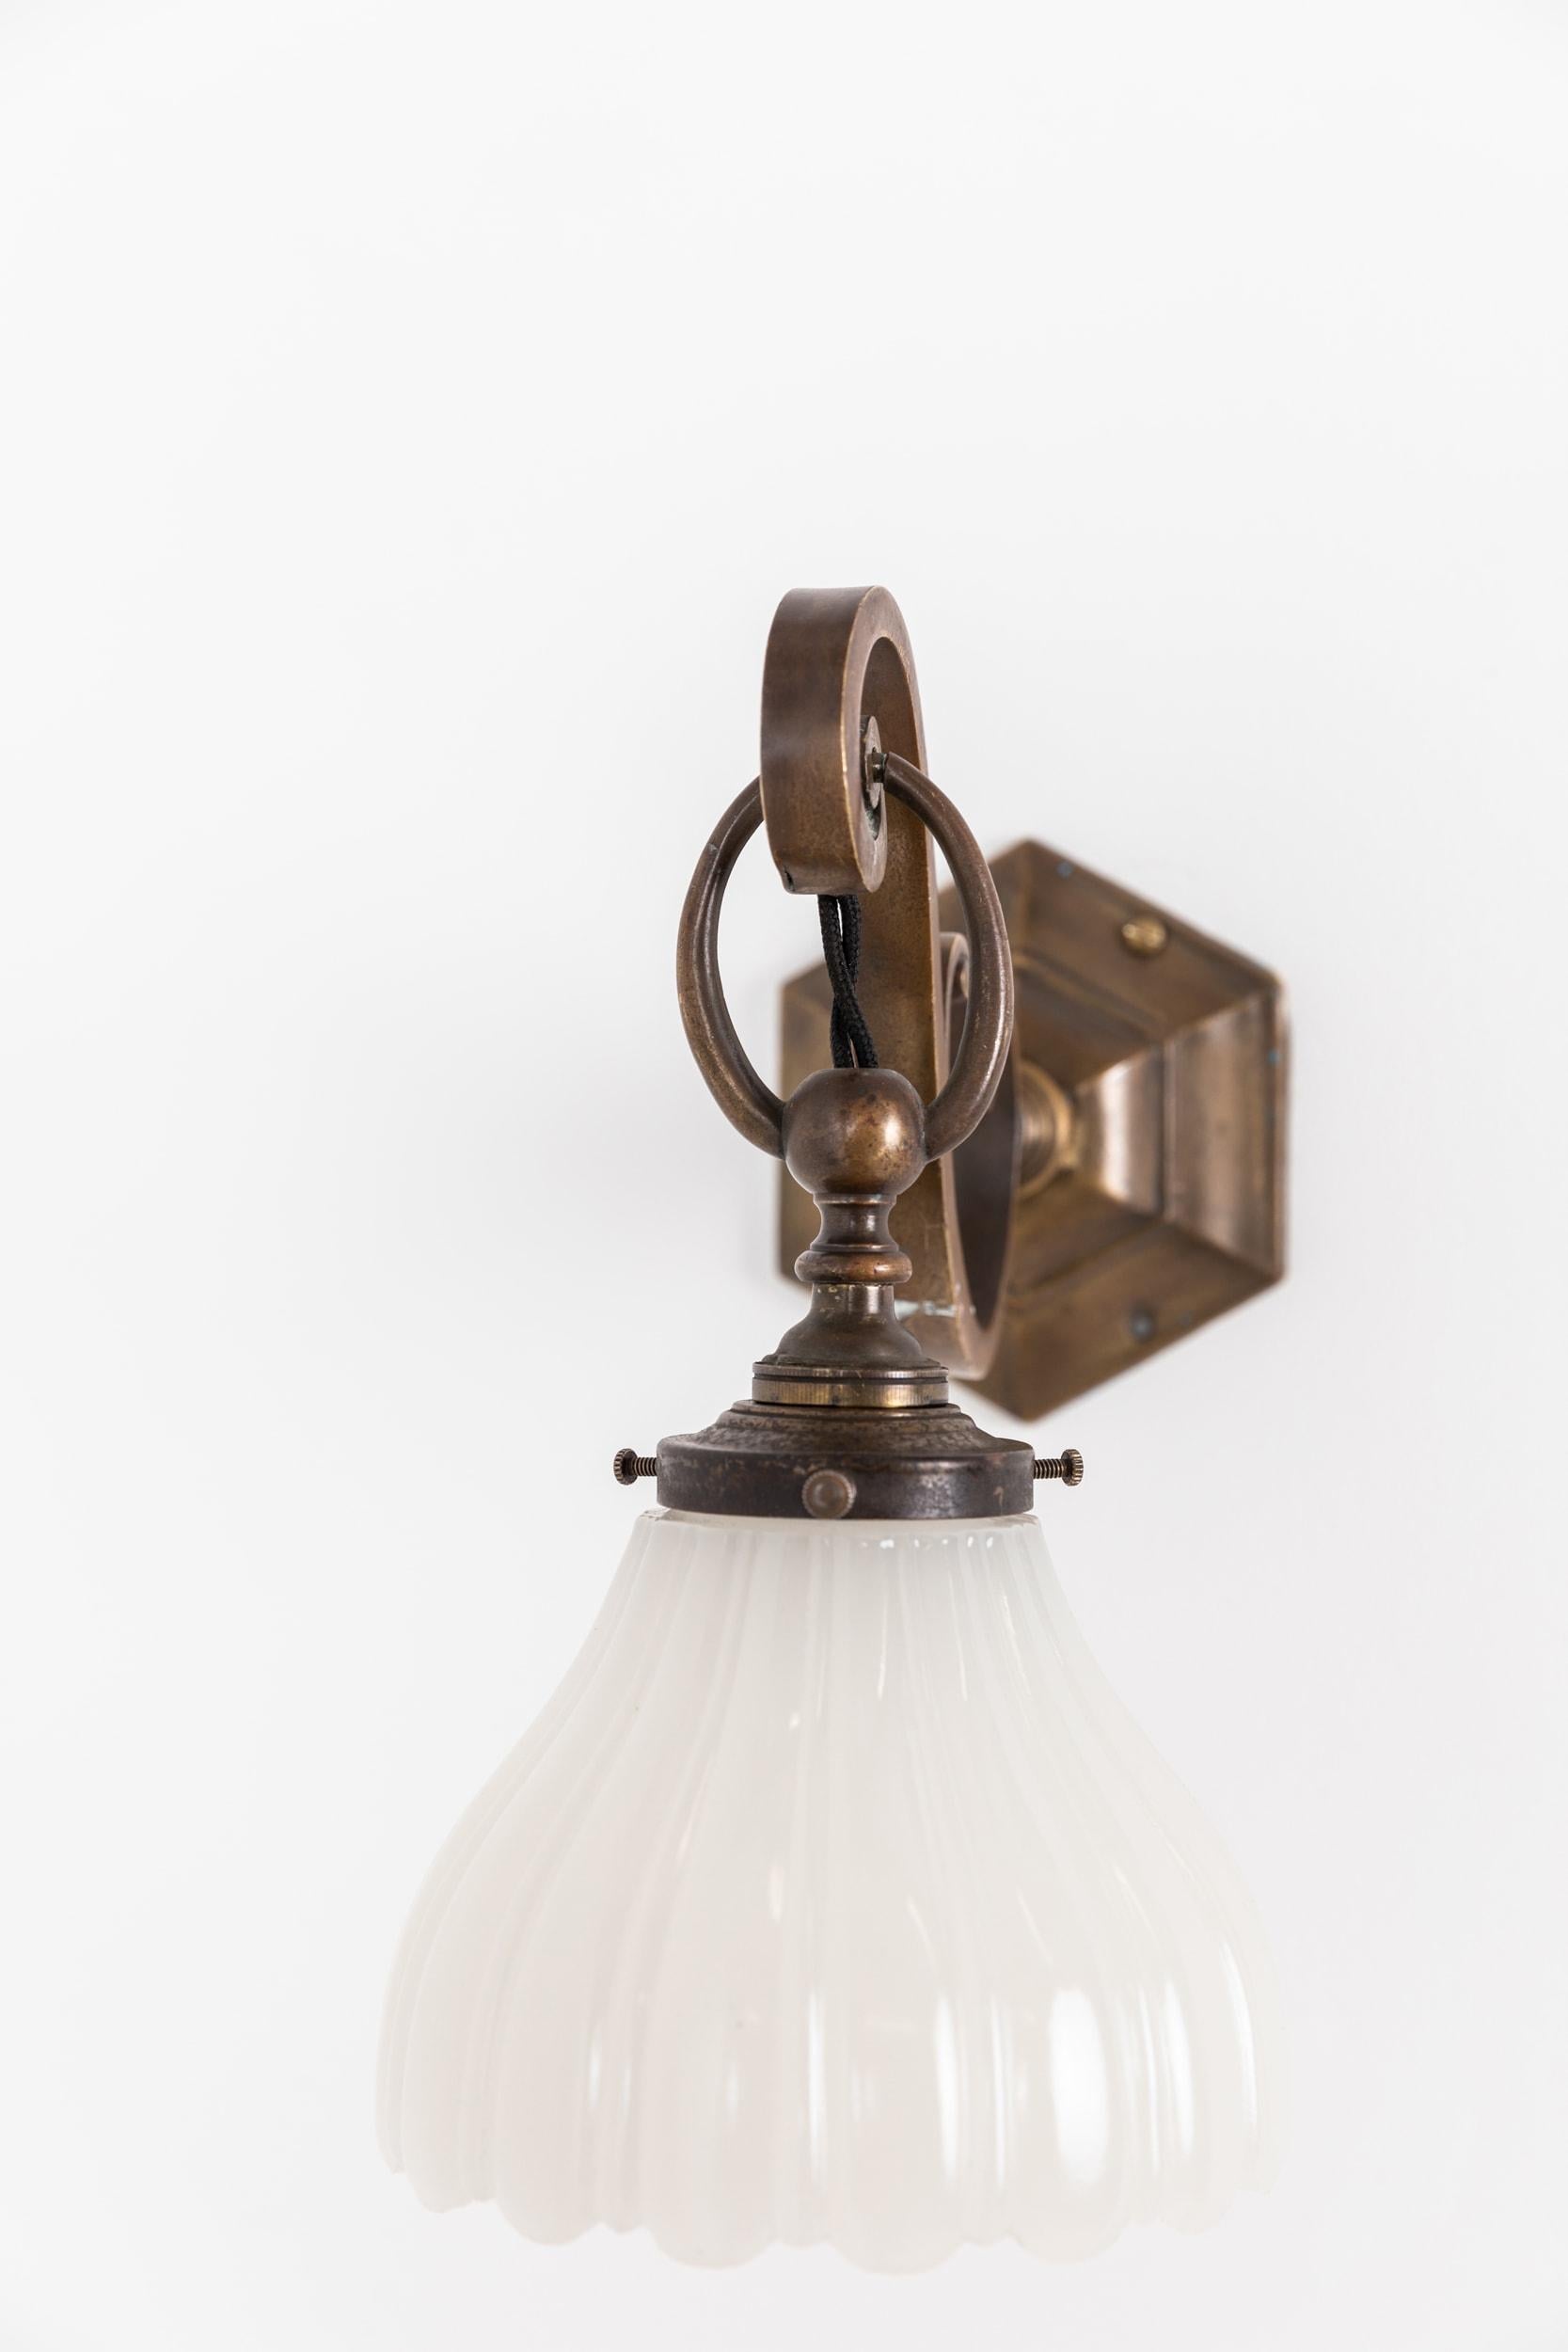 Mid-20th Century Vintage Antique Brass GEC Moonstone Wall Lamp Sconce Light c.1930 For Sale